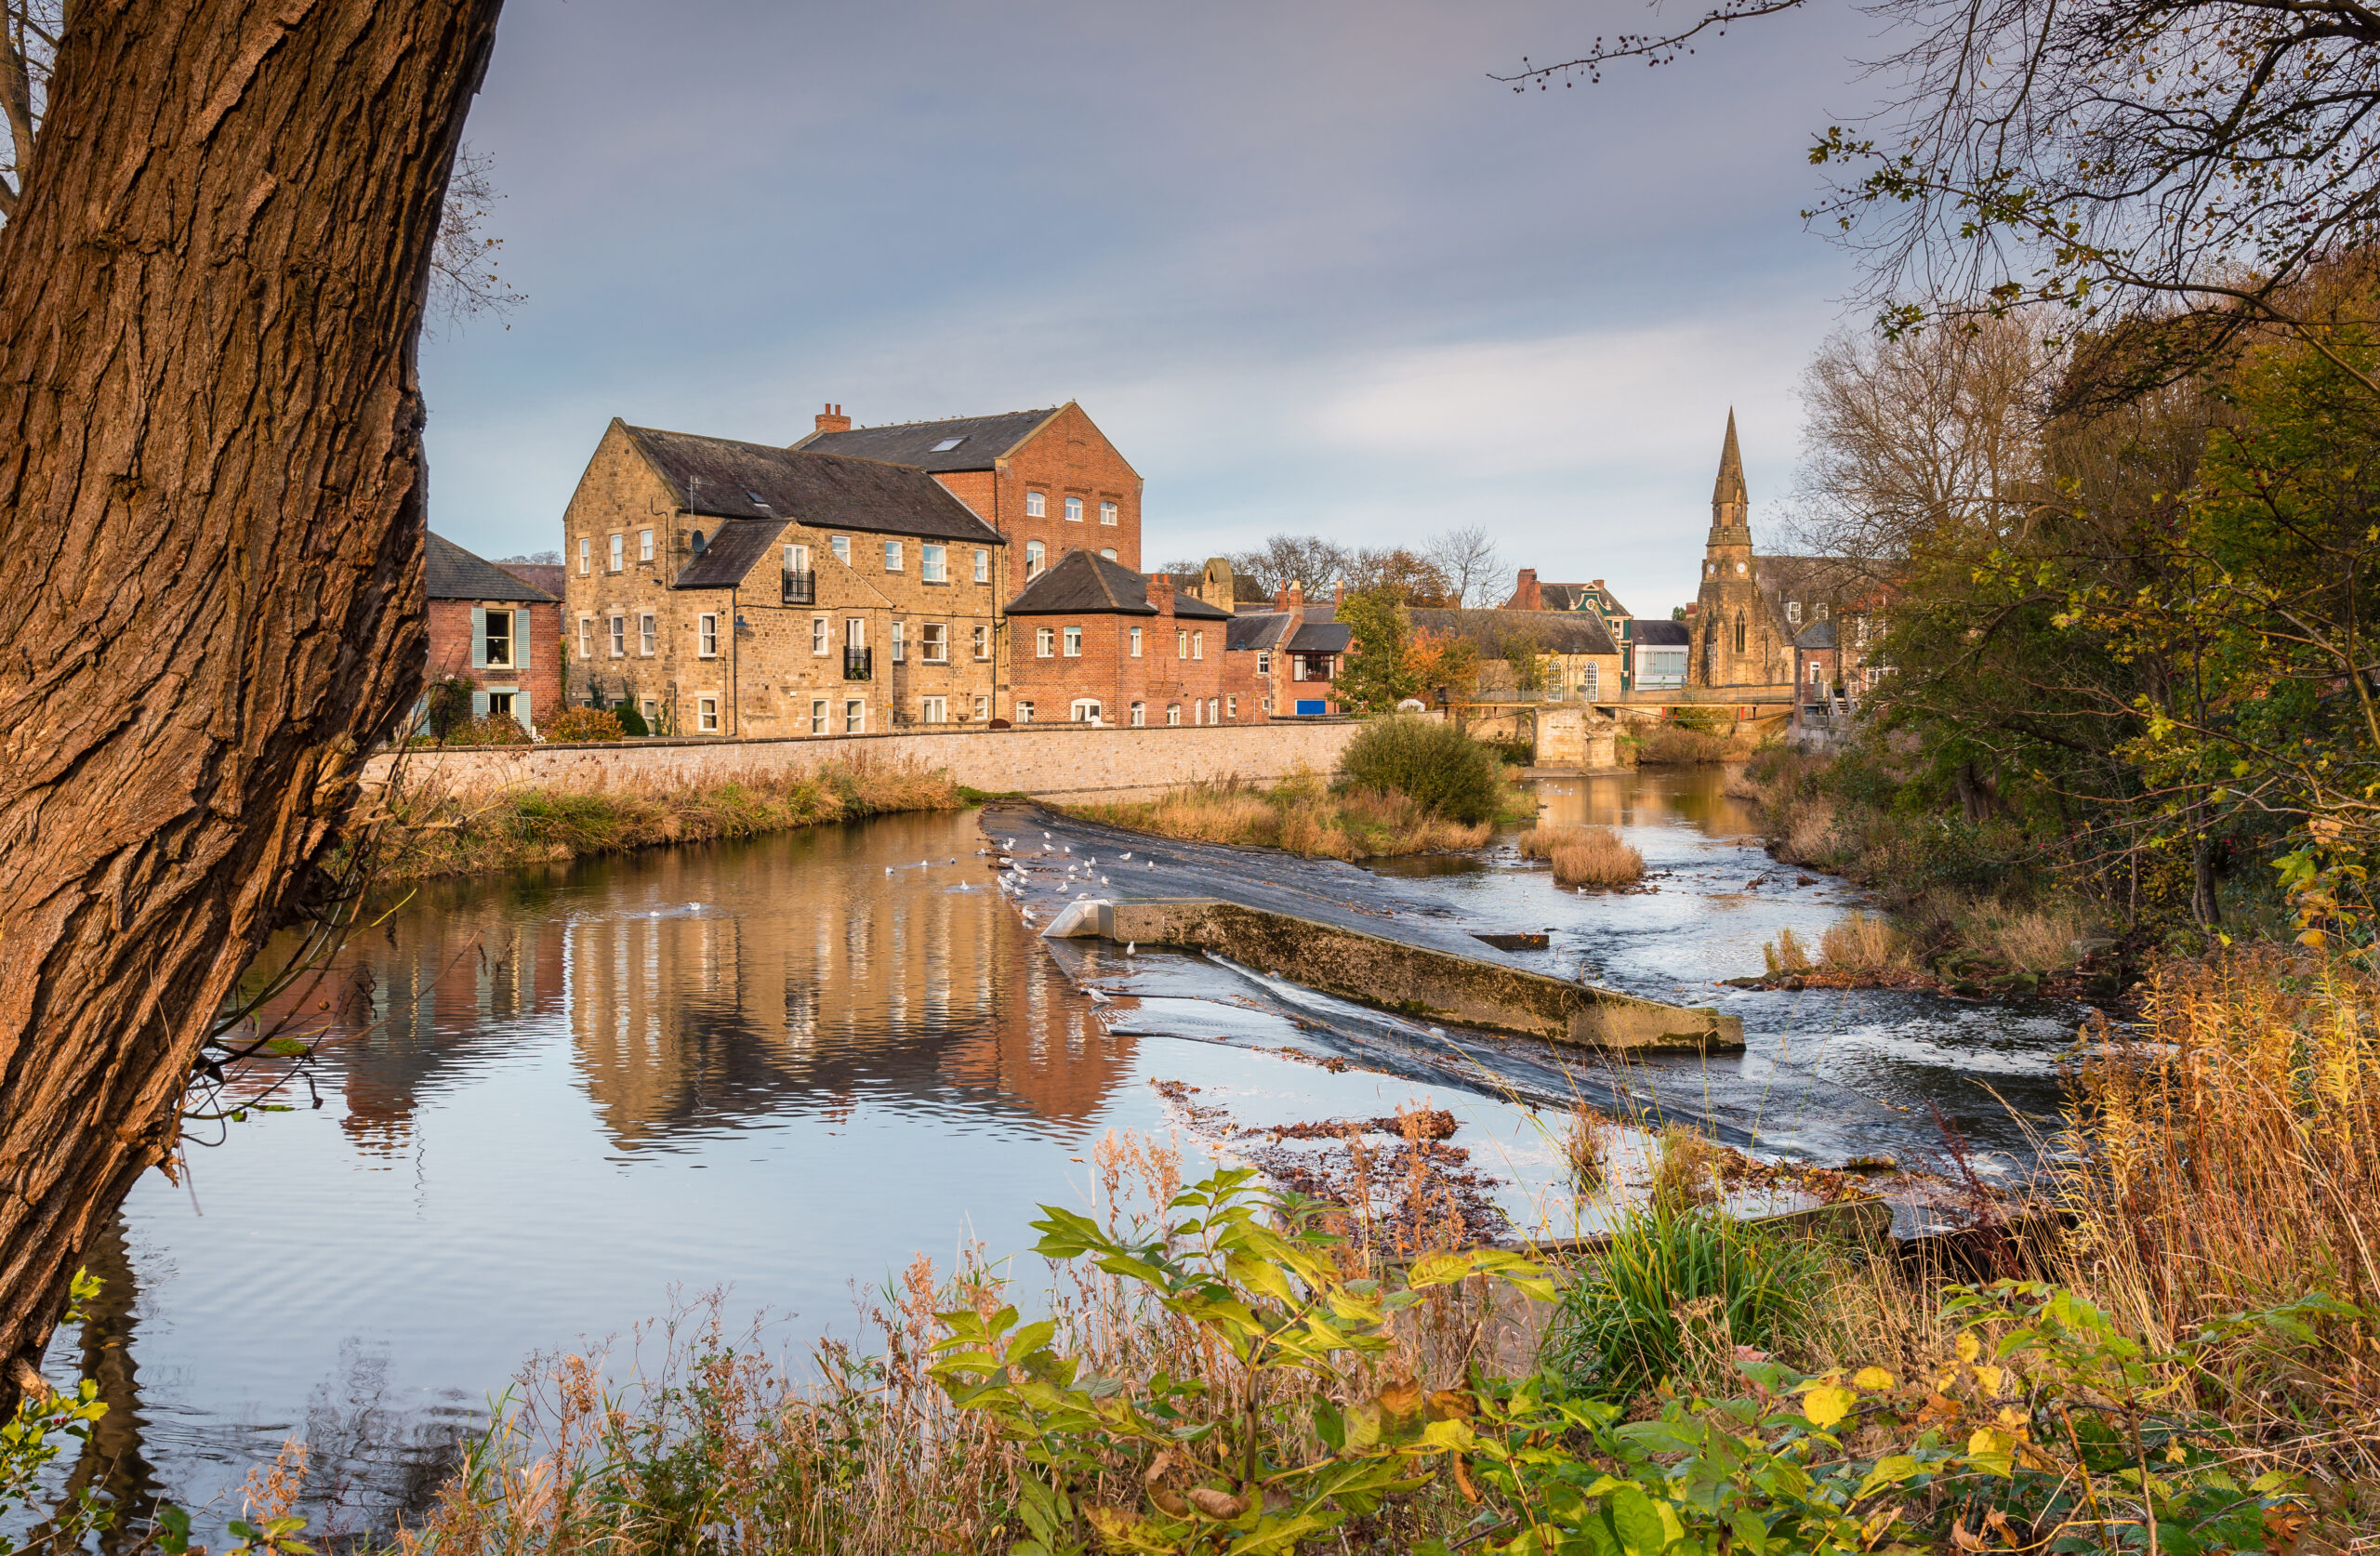 Image of a river with a small waterfall, surrounded by Trees and buildings in Morpeth where we do Pat Testing